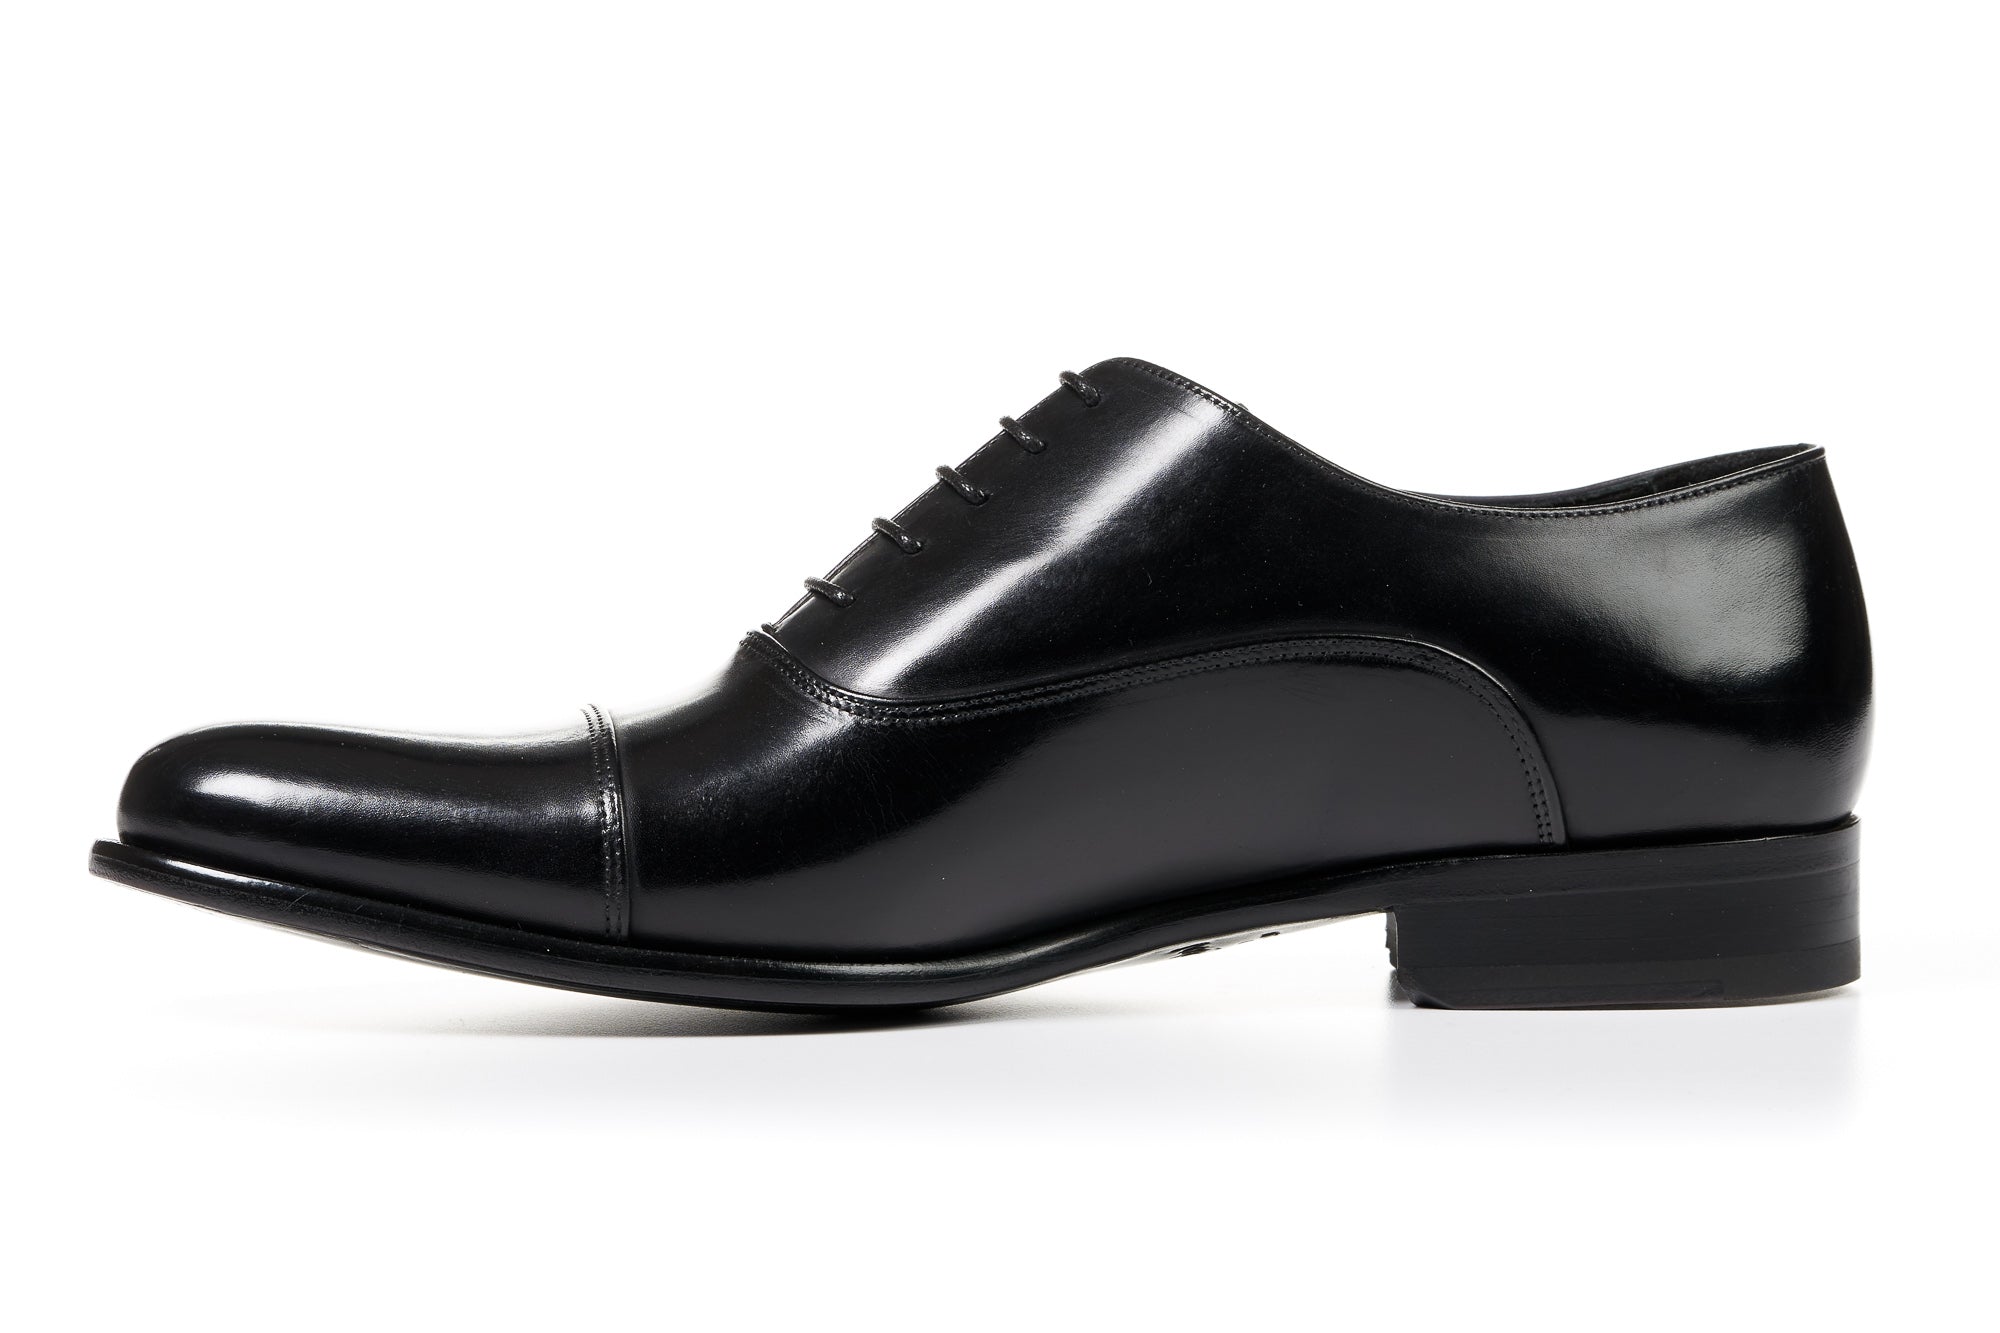 Men's Formal Shoes, Fashionable Black Business Style | SHEIN USA